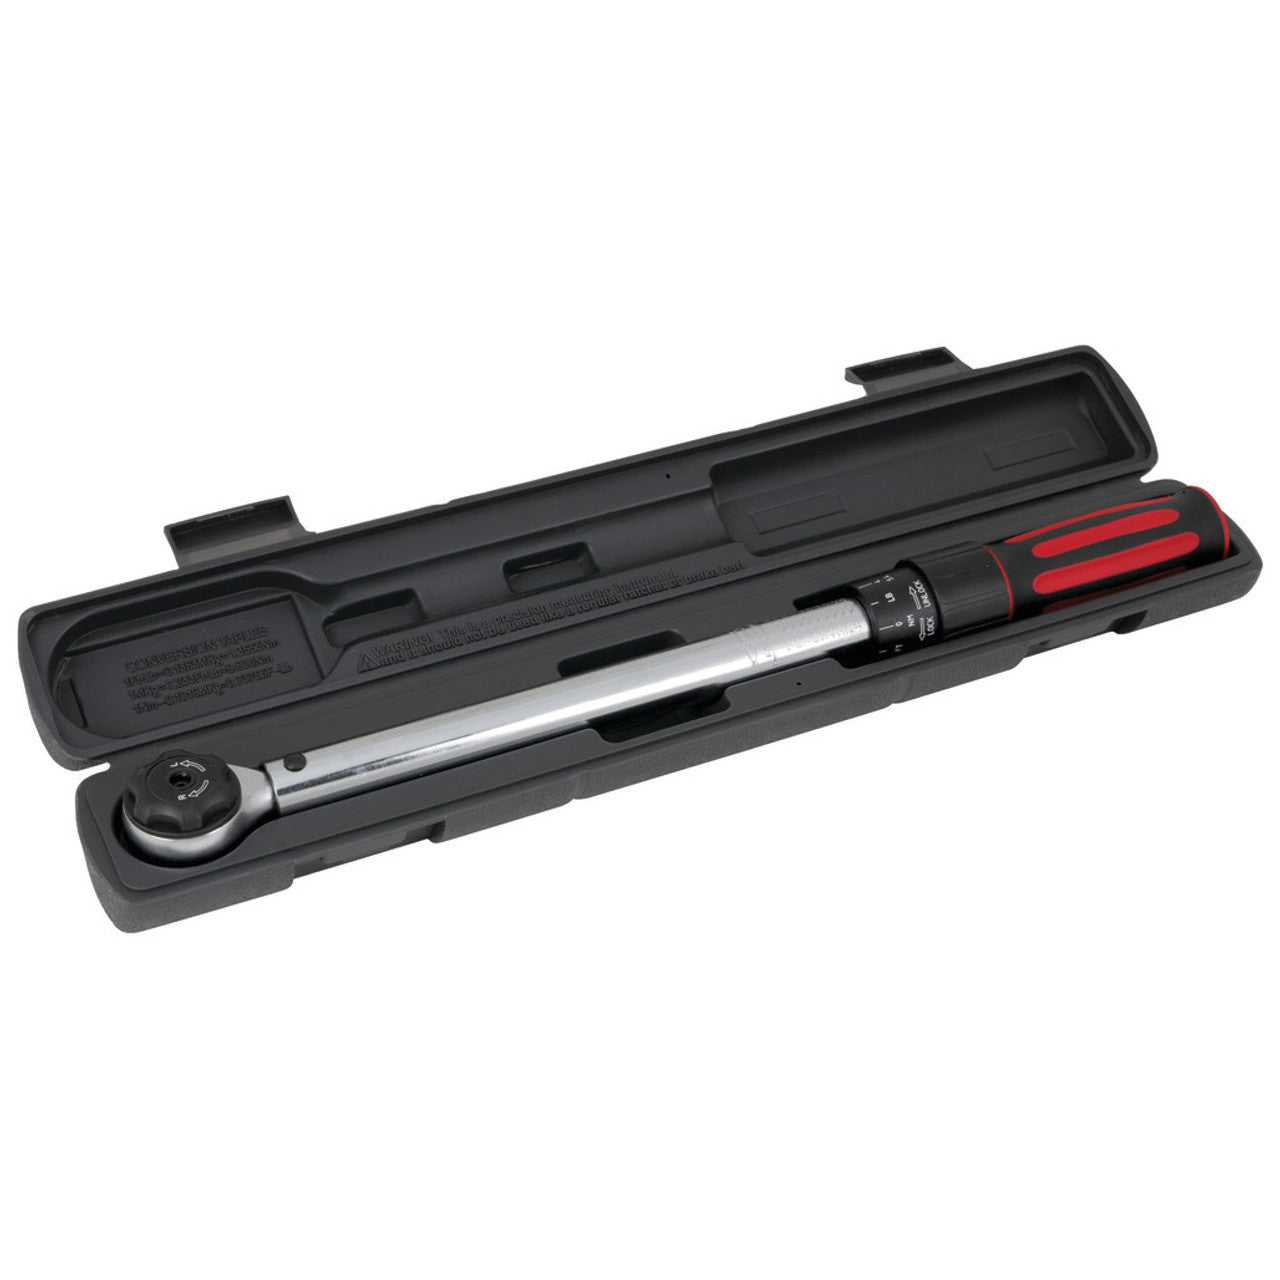 Torque Wrench : Foot-Pound, 3/8 in Drive Size 10-100 FtLb